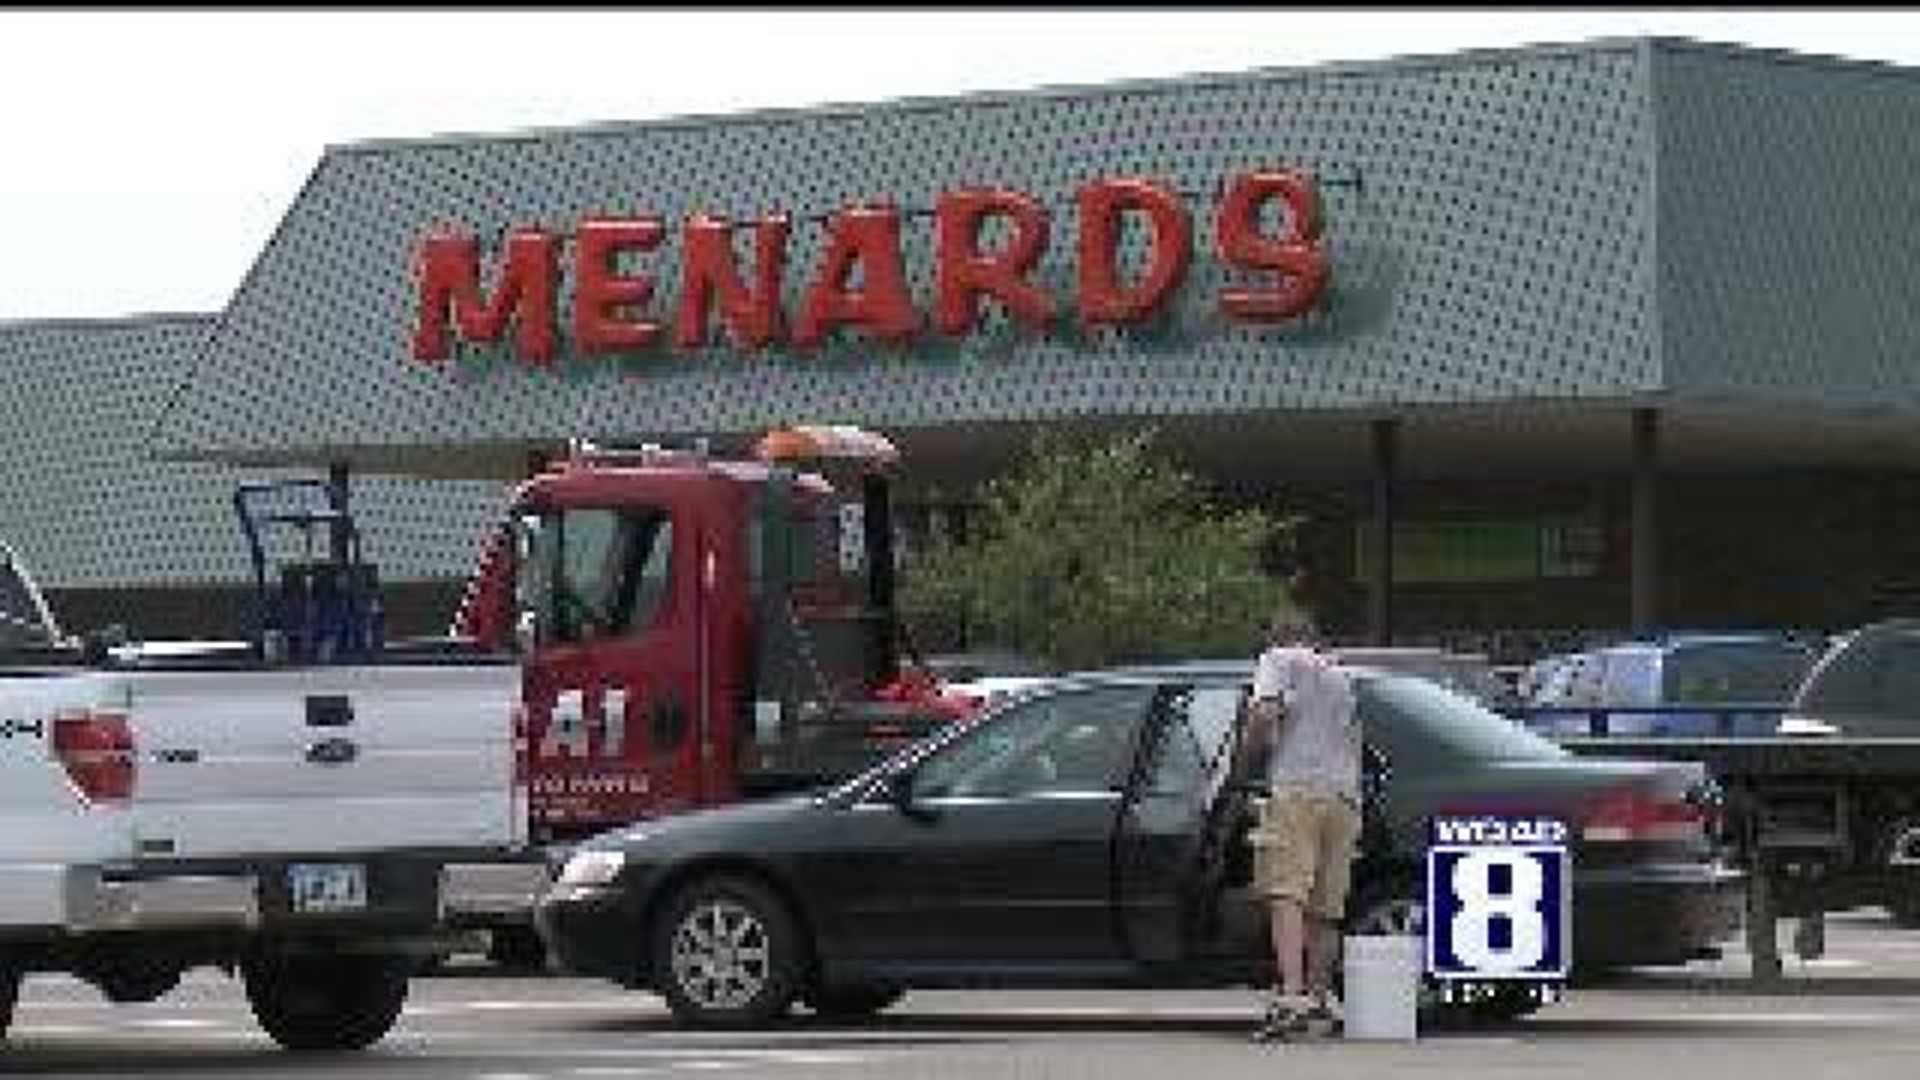 Old Davenport Menards could become storage units